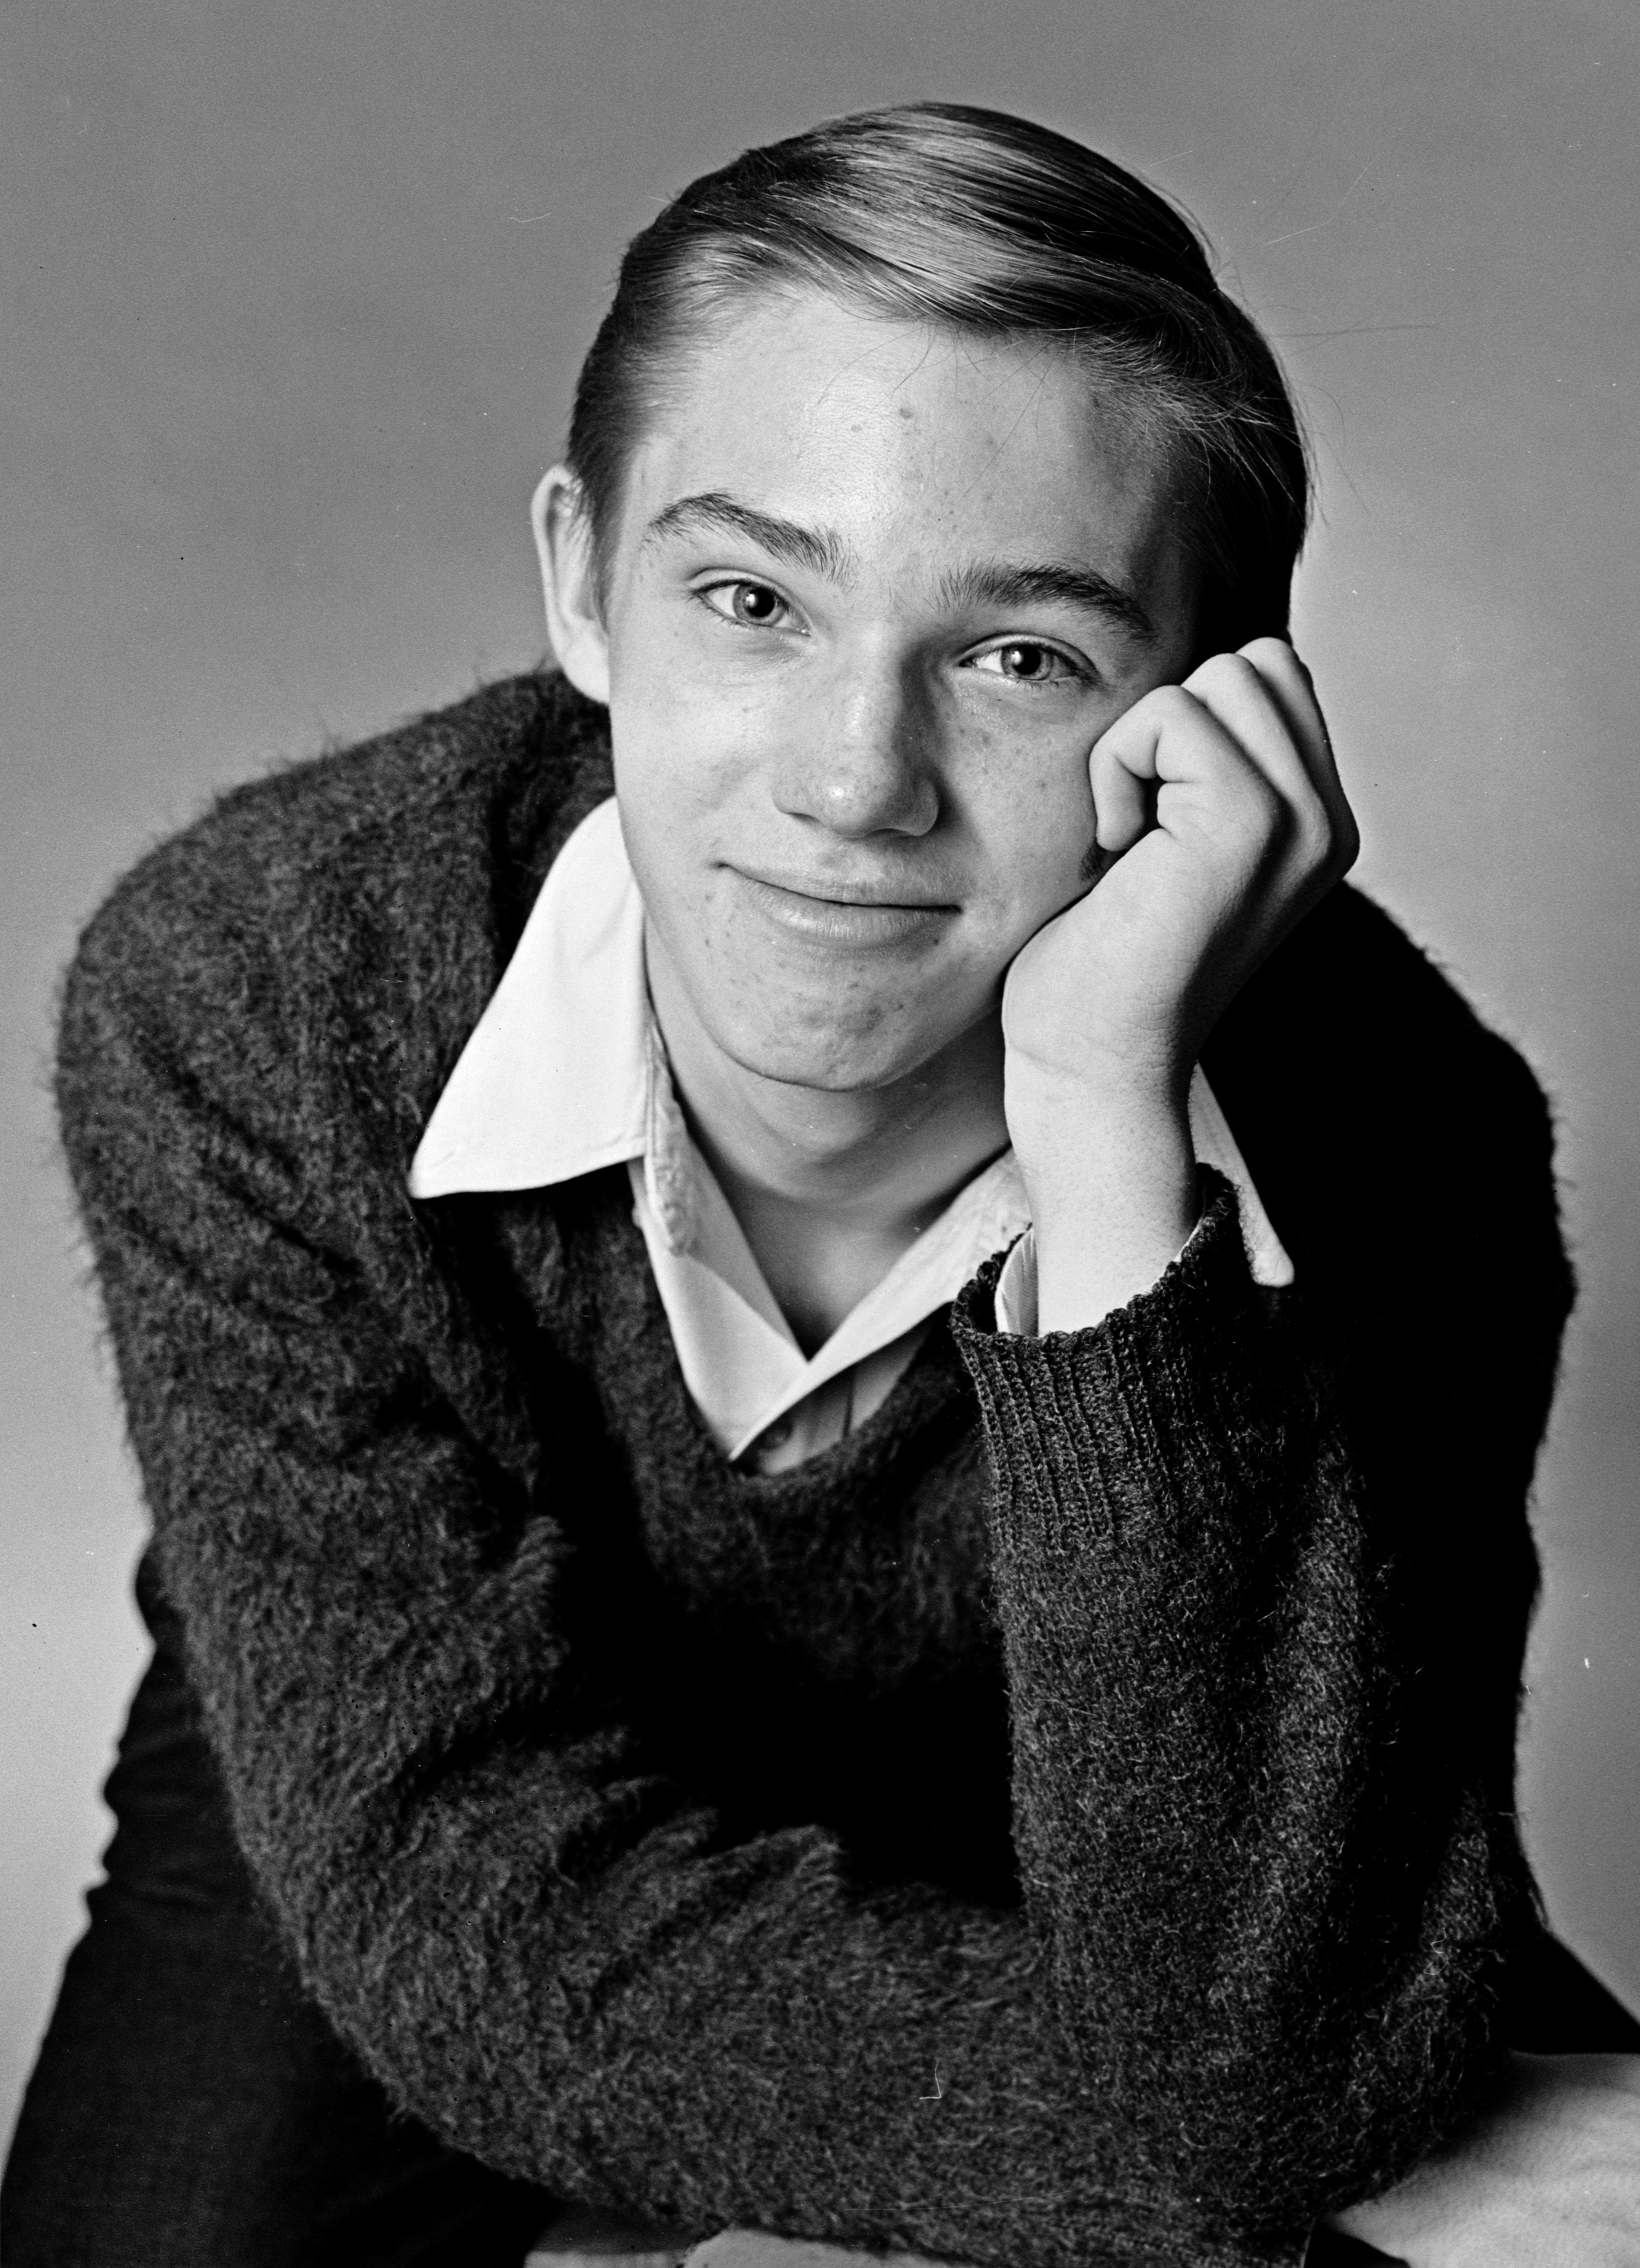 Richard Thomas photographed at age 14 in 1965. | Source: Getty Images